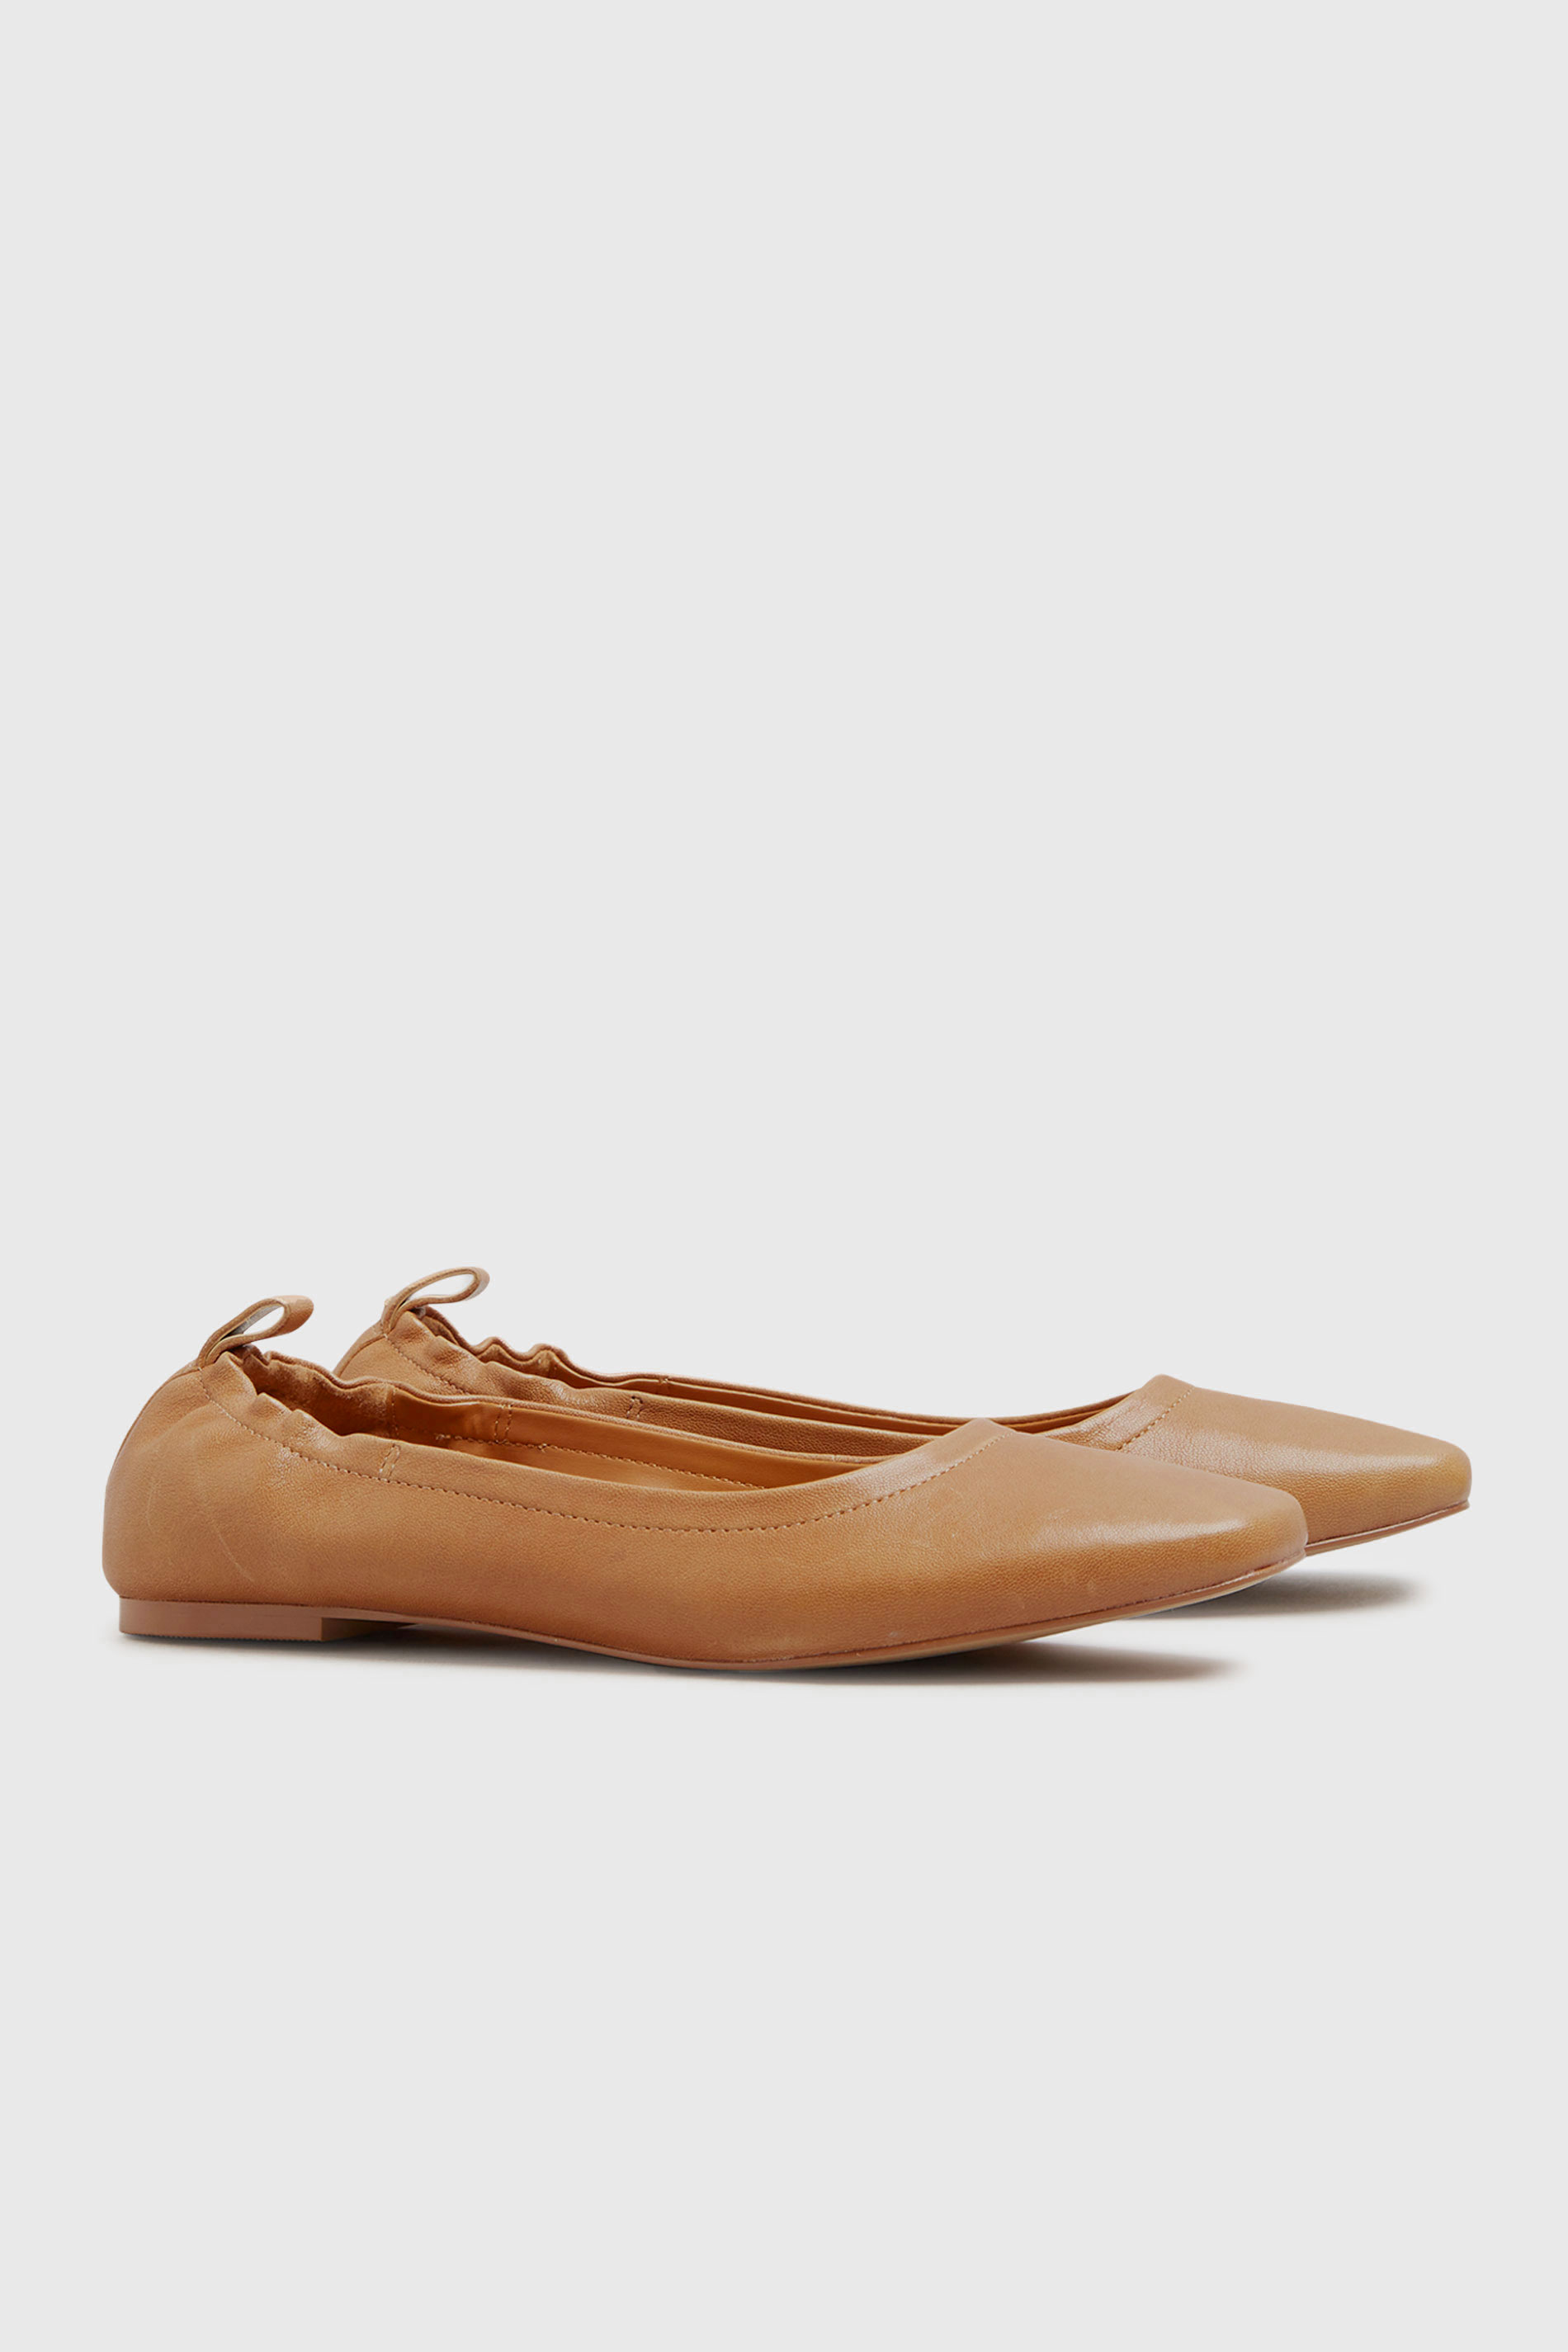 LTS Camel Brown Square Toe Leather Ballet Shoes_C.jpg